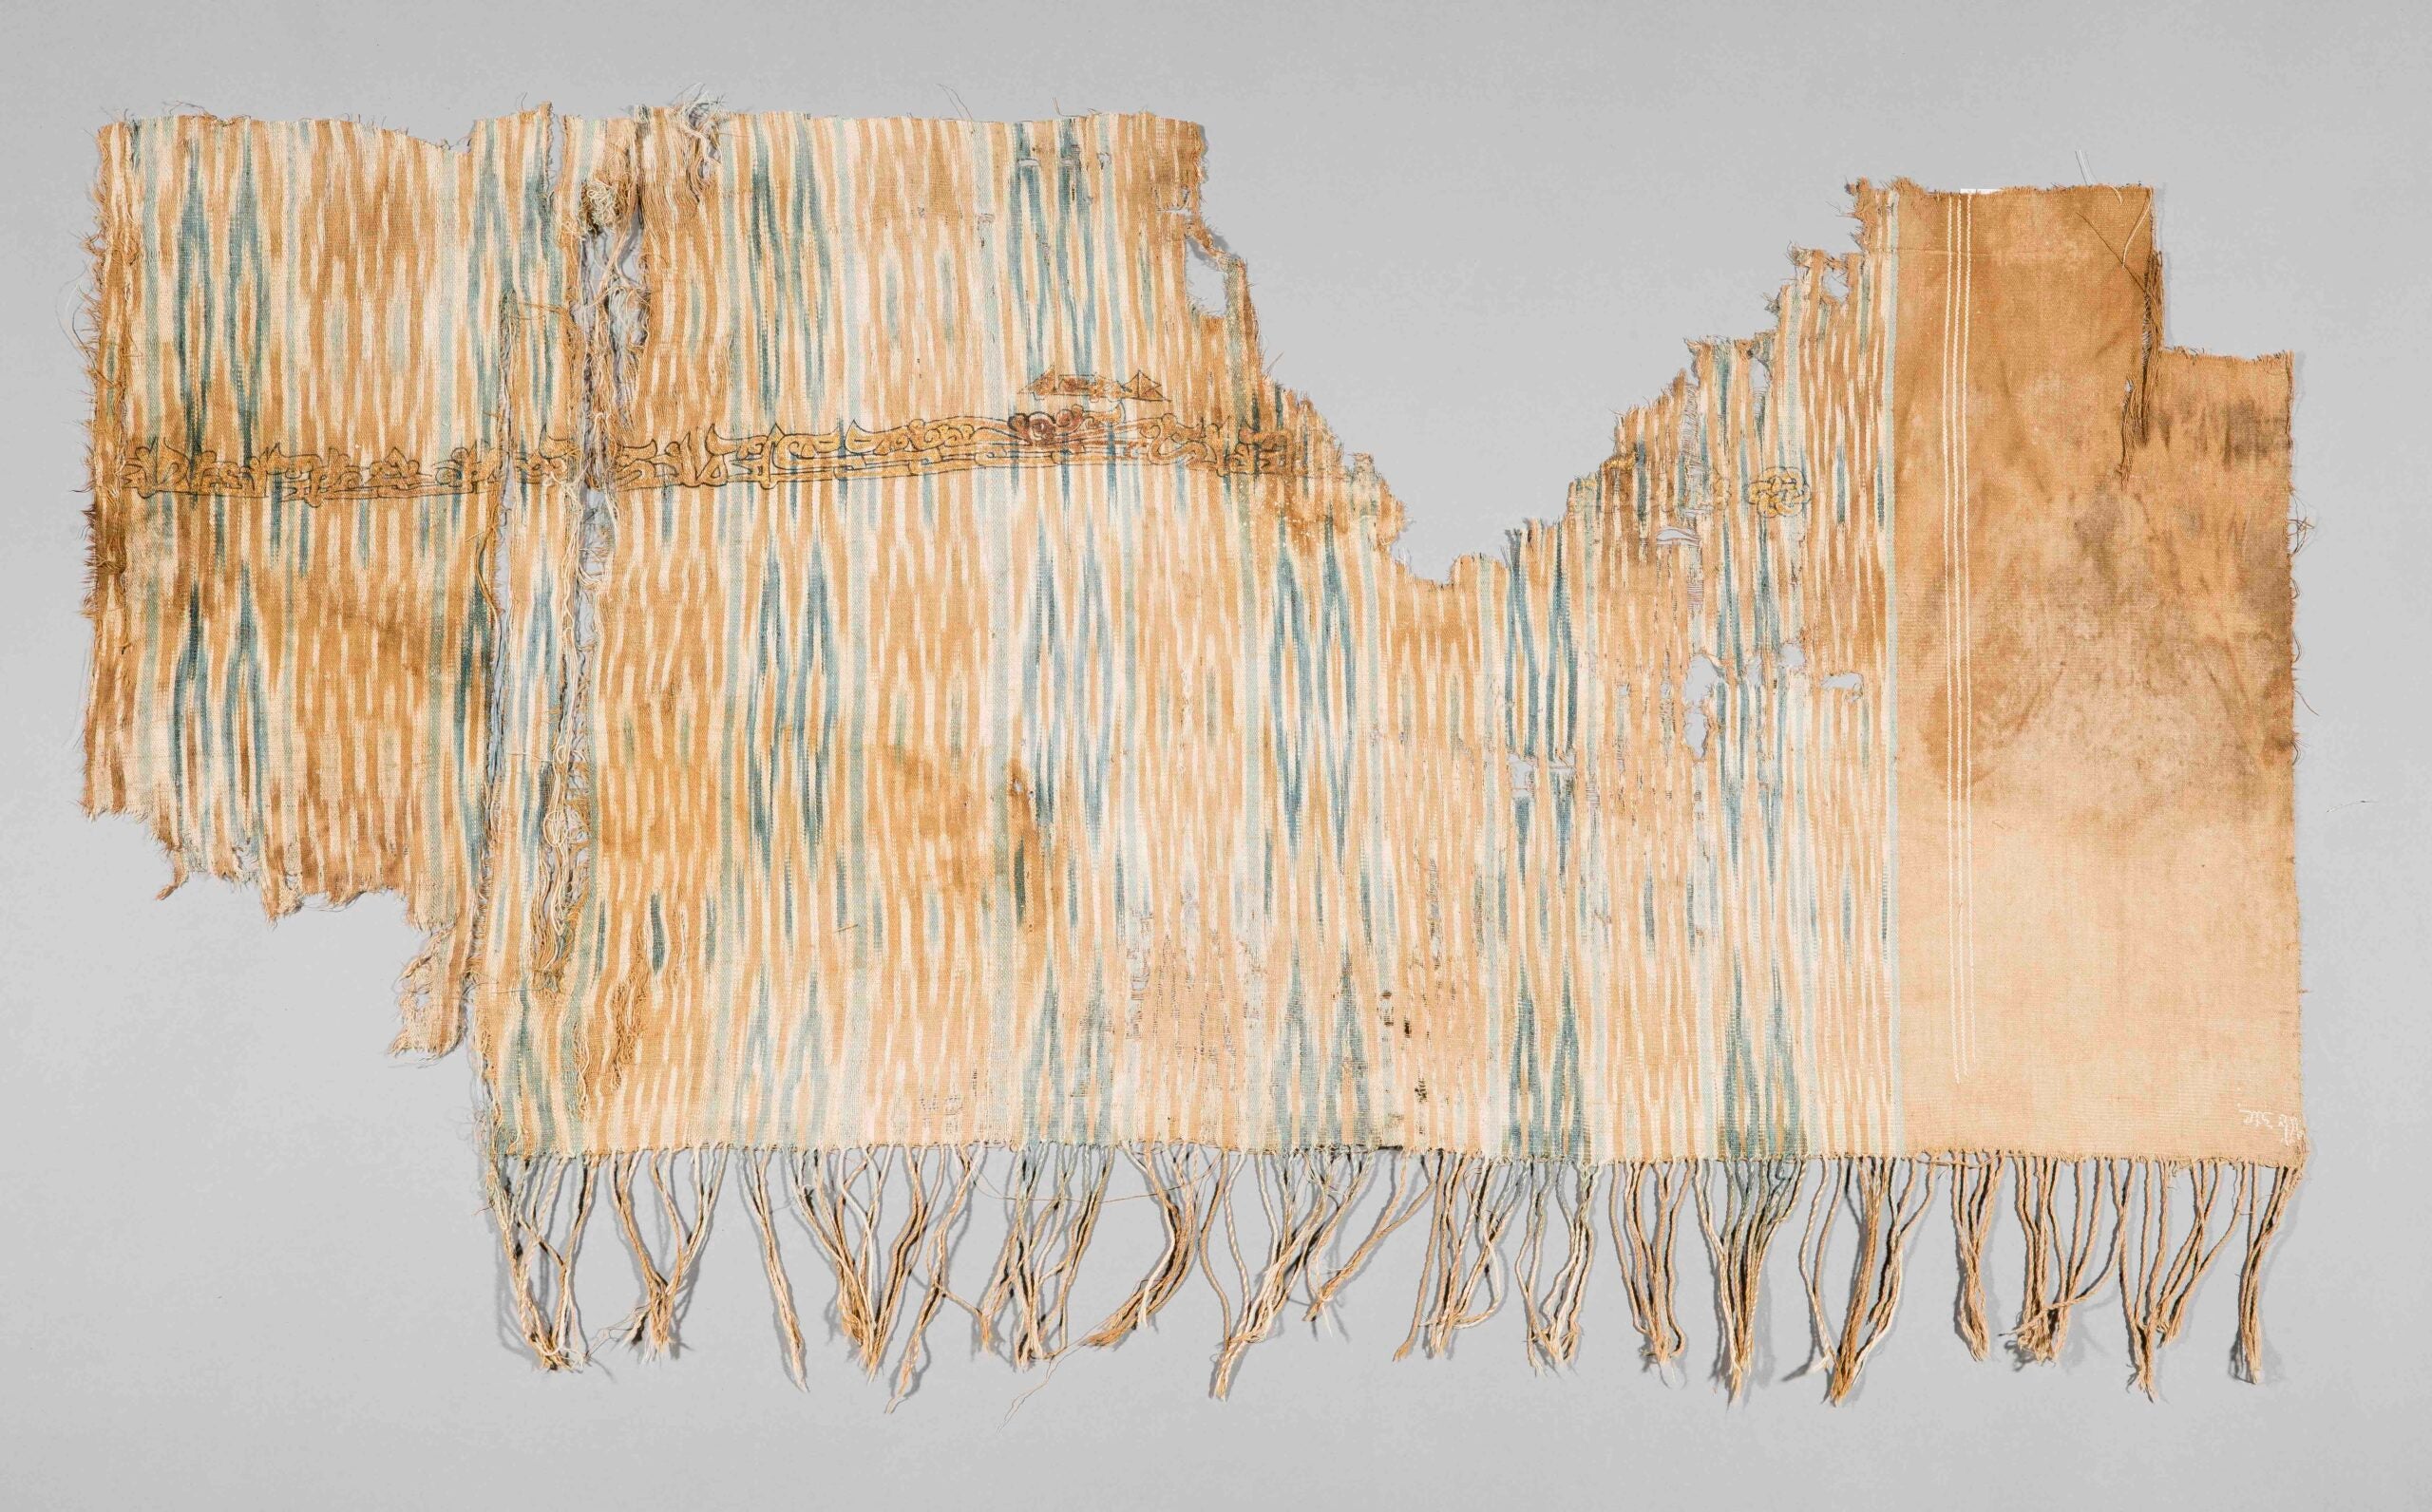 Blue and tan patterned textile with a line of text across the upper portion and fringe along the bottom.